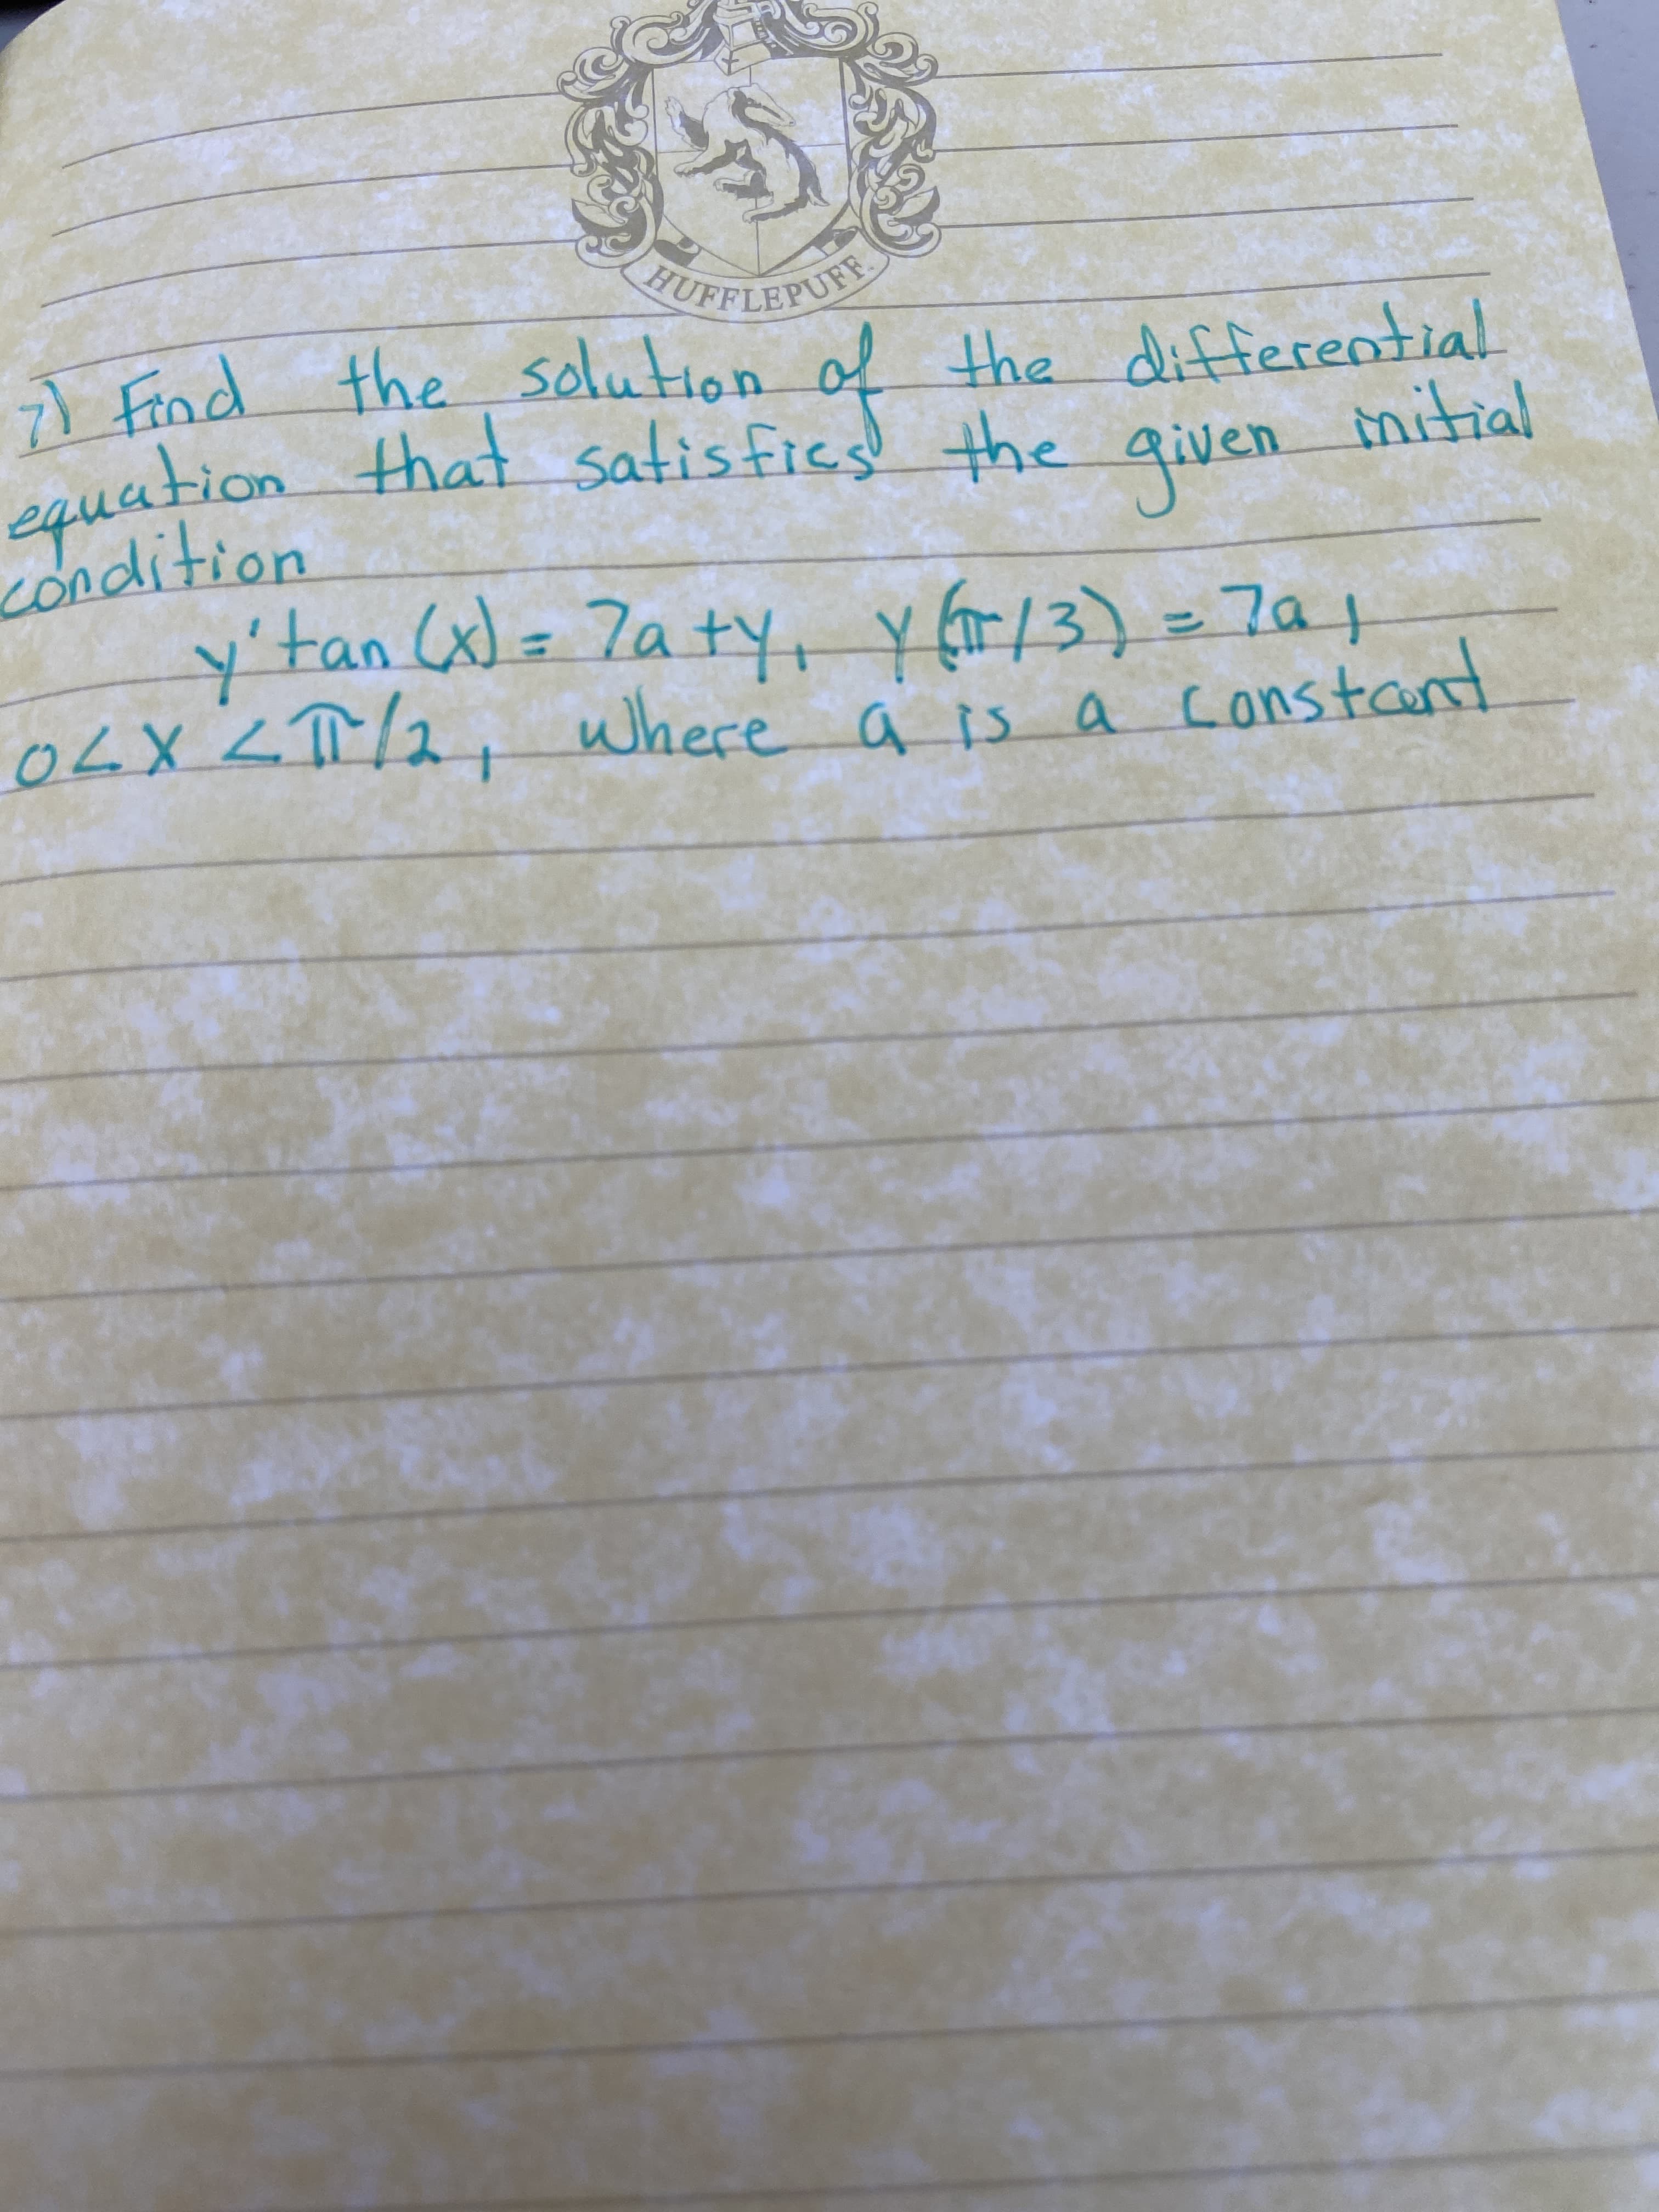 the solution of the differential
Find
ation that satis fies the
dition
mitial
given
~/ っ7a!
-13)
